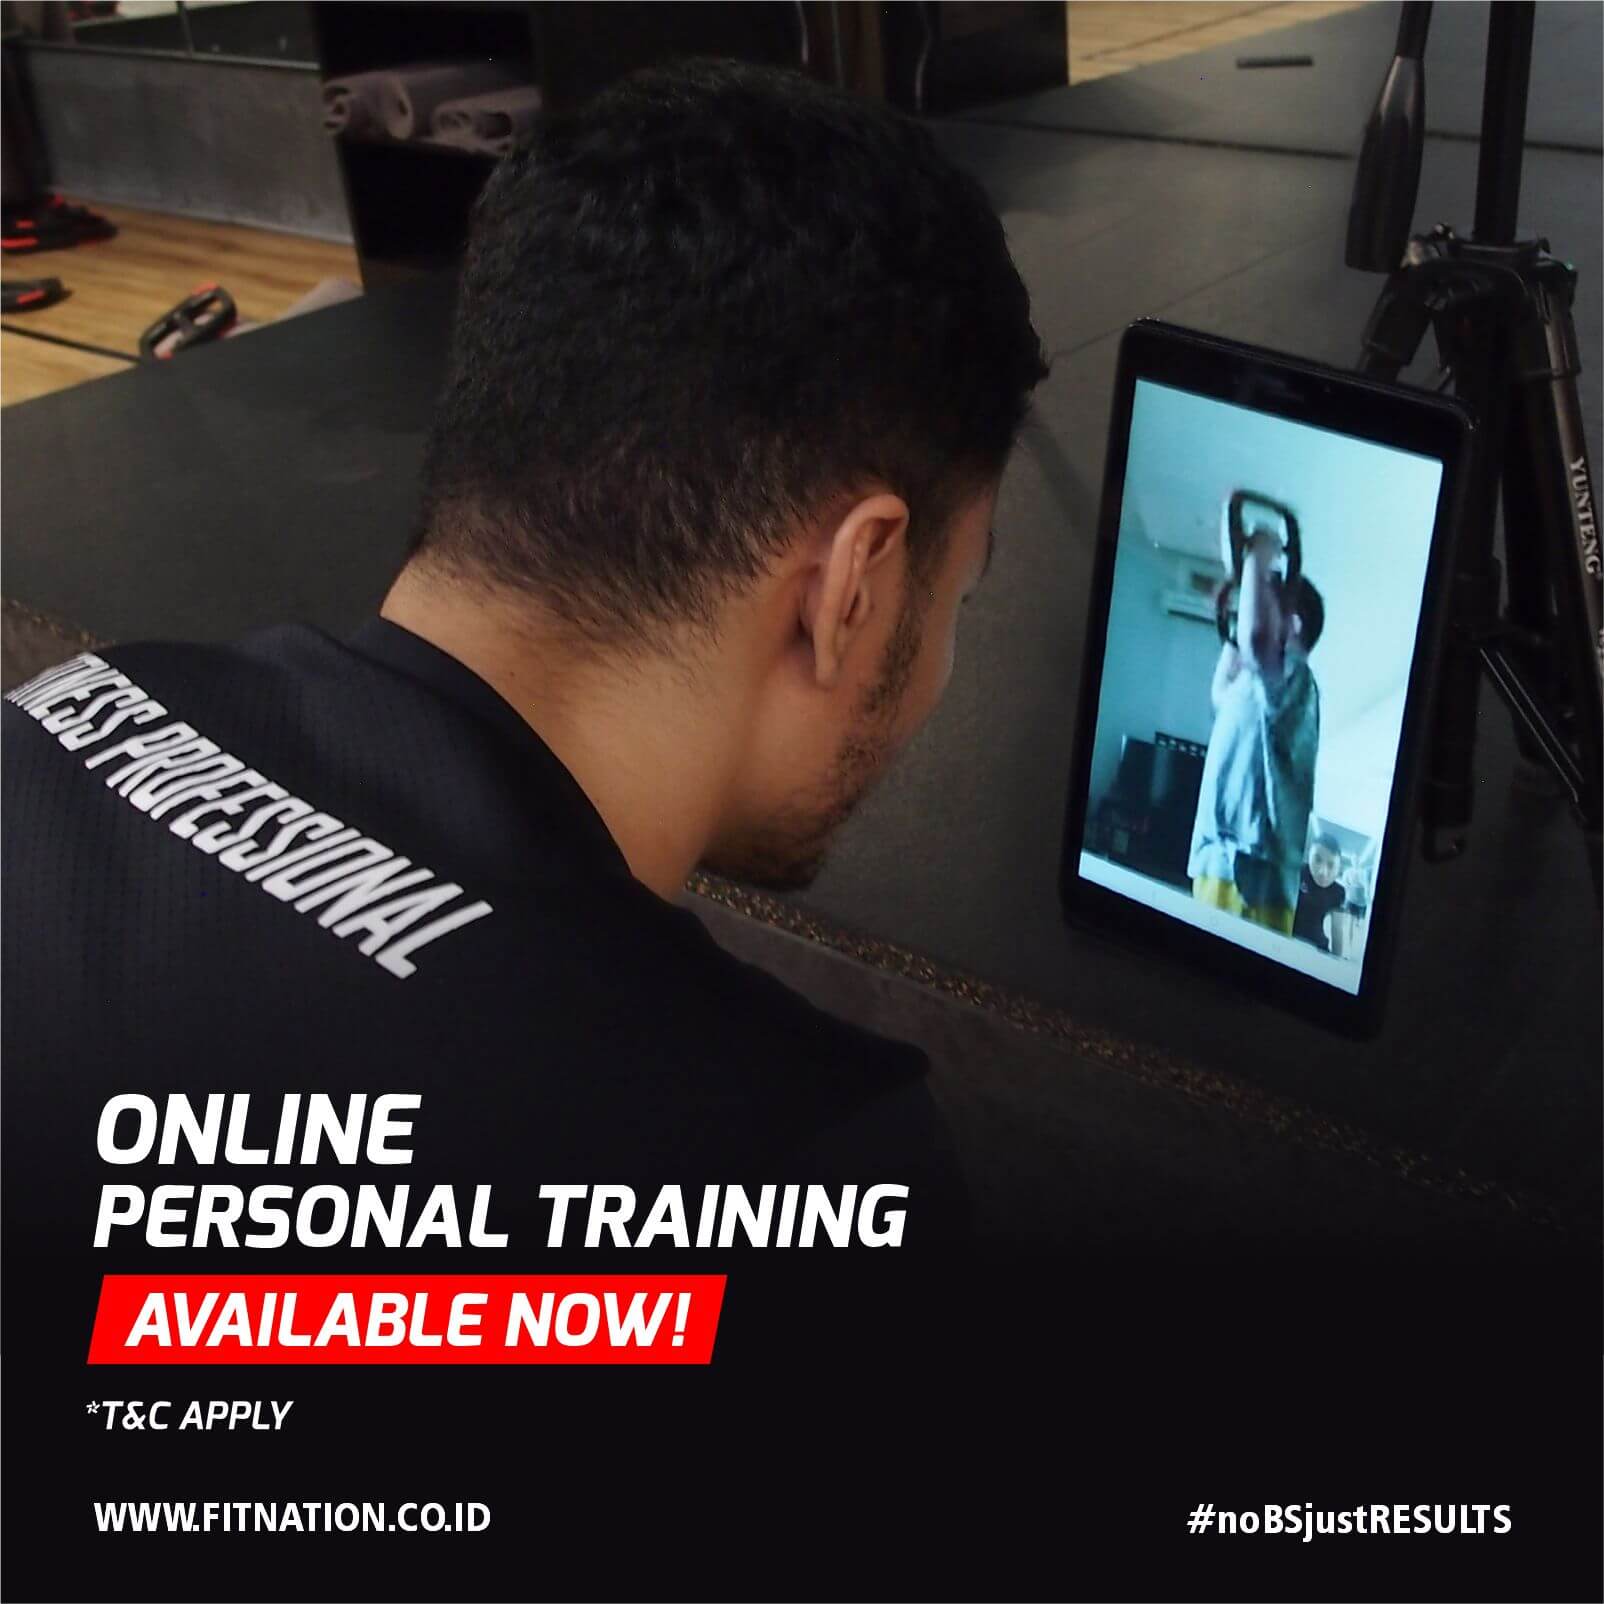 ONLINE PERSONAL TRAINING